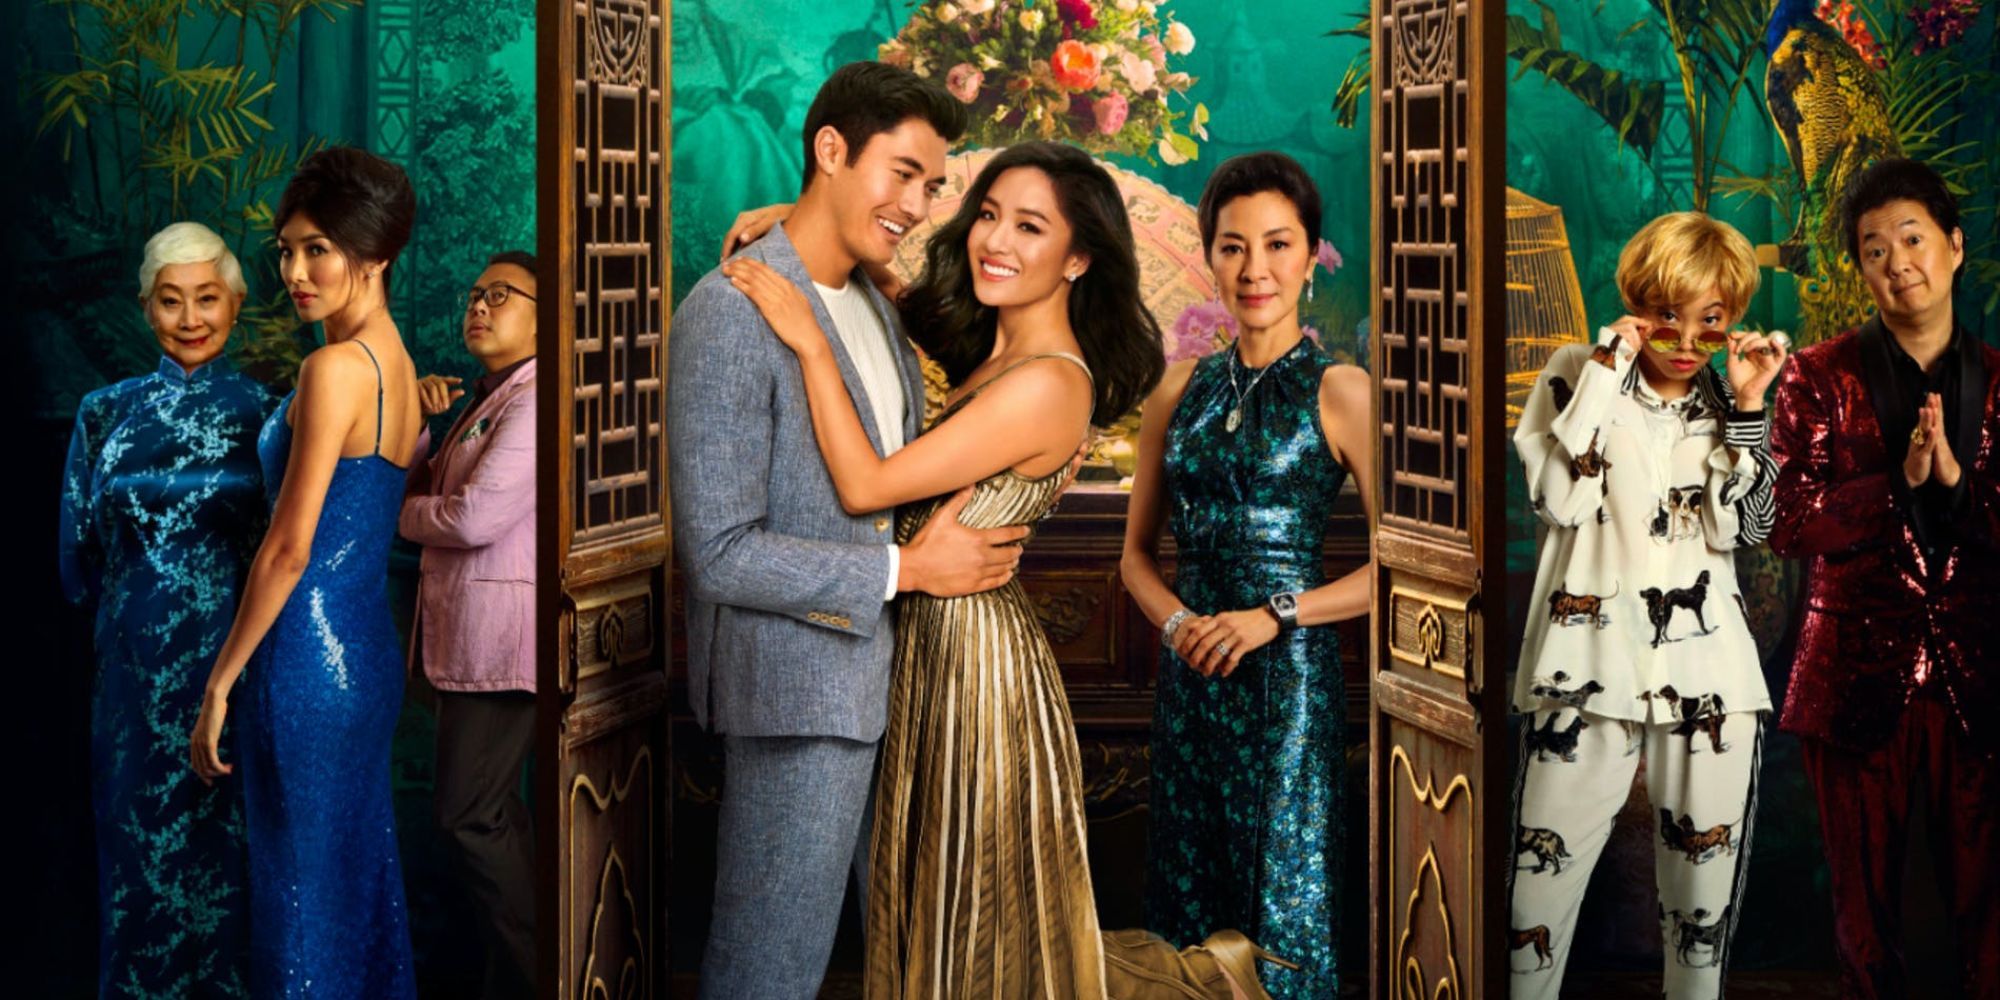 Poster of the cast of Crazy Rich Asians including Constance Wu, Michelle Yeoh, and Henry Golding